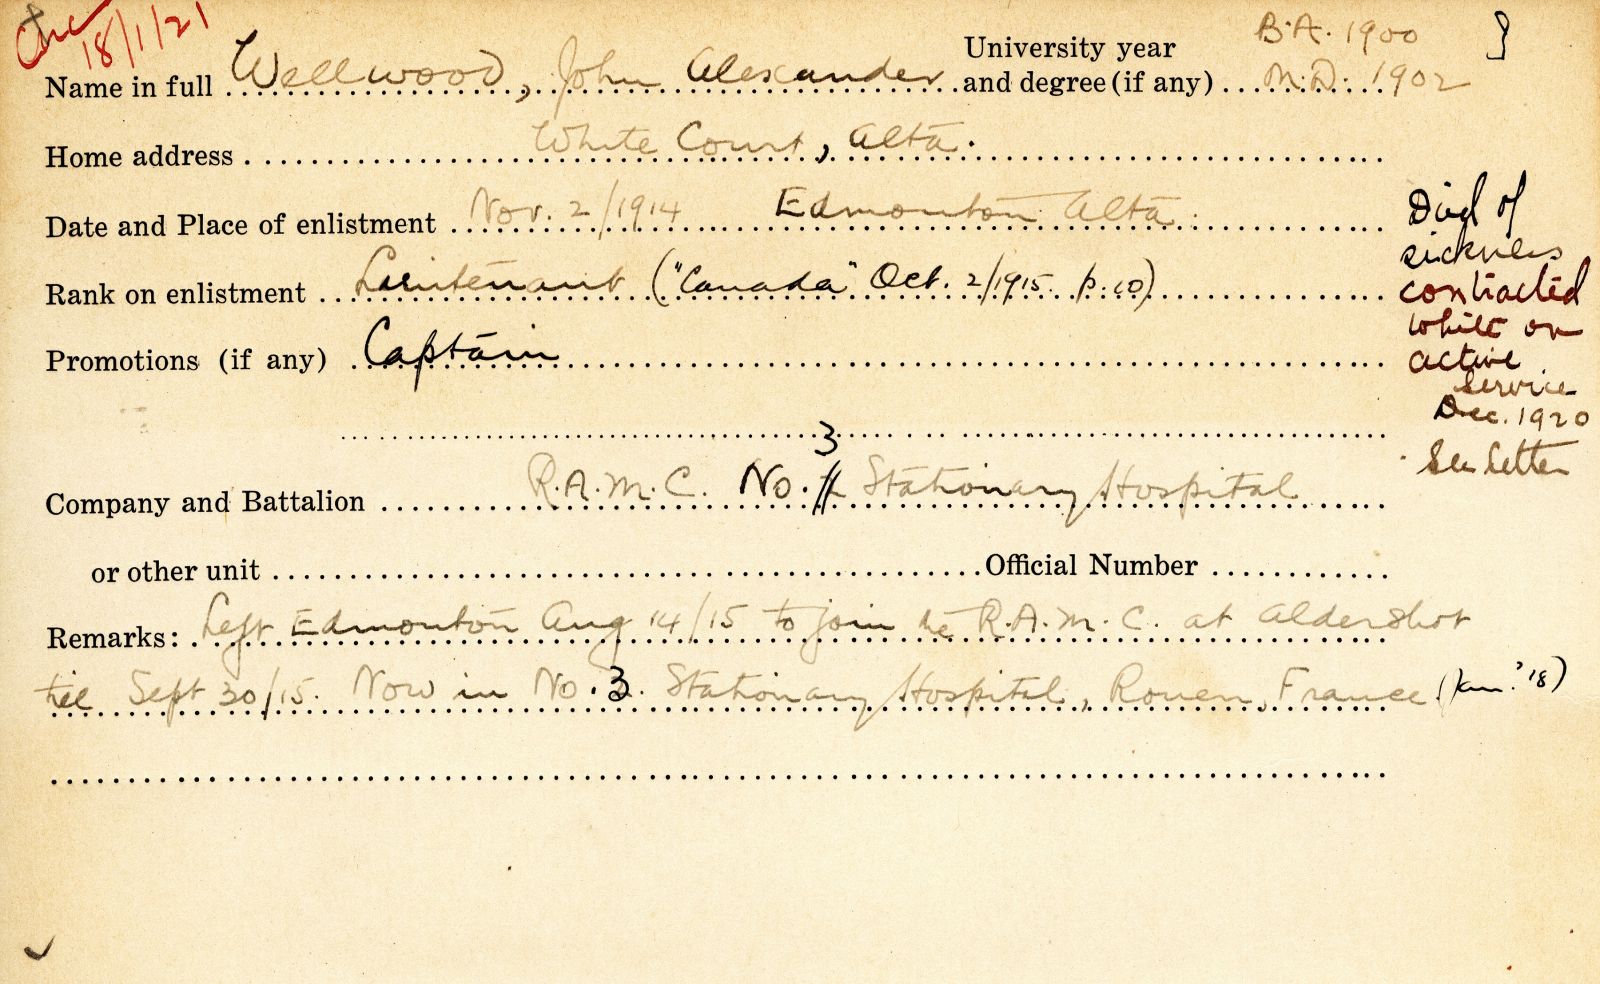 University Military Service Record of Wellwood